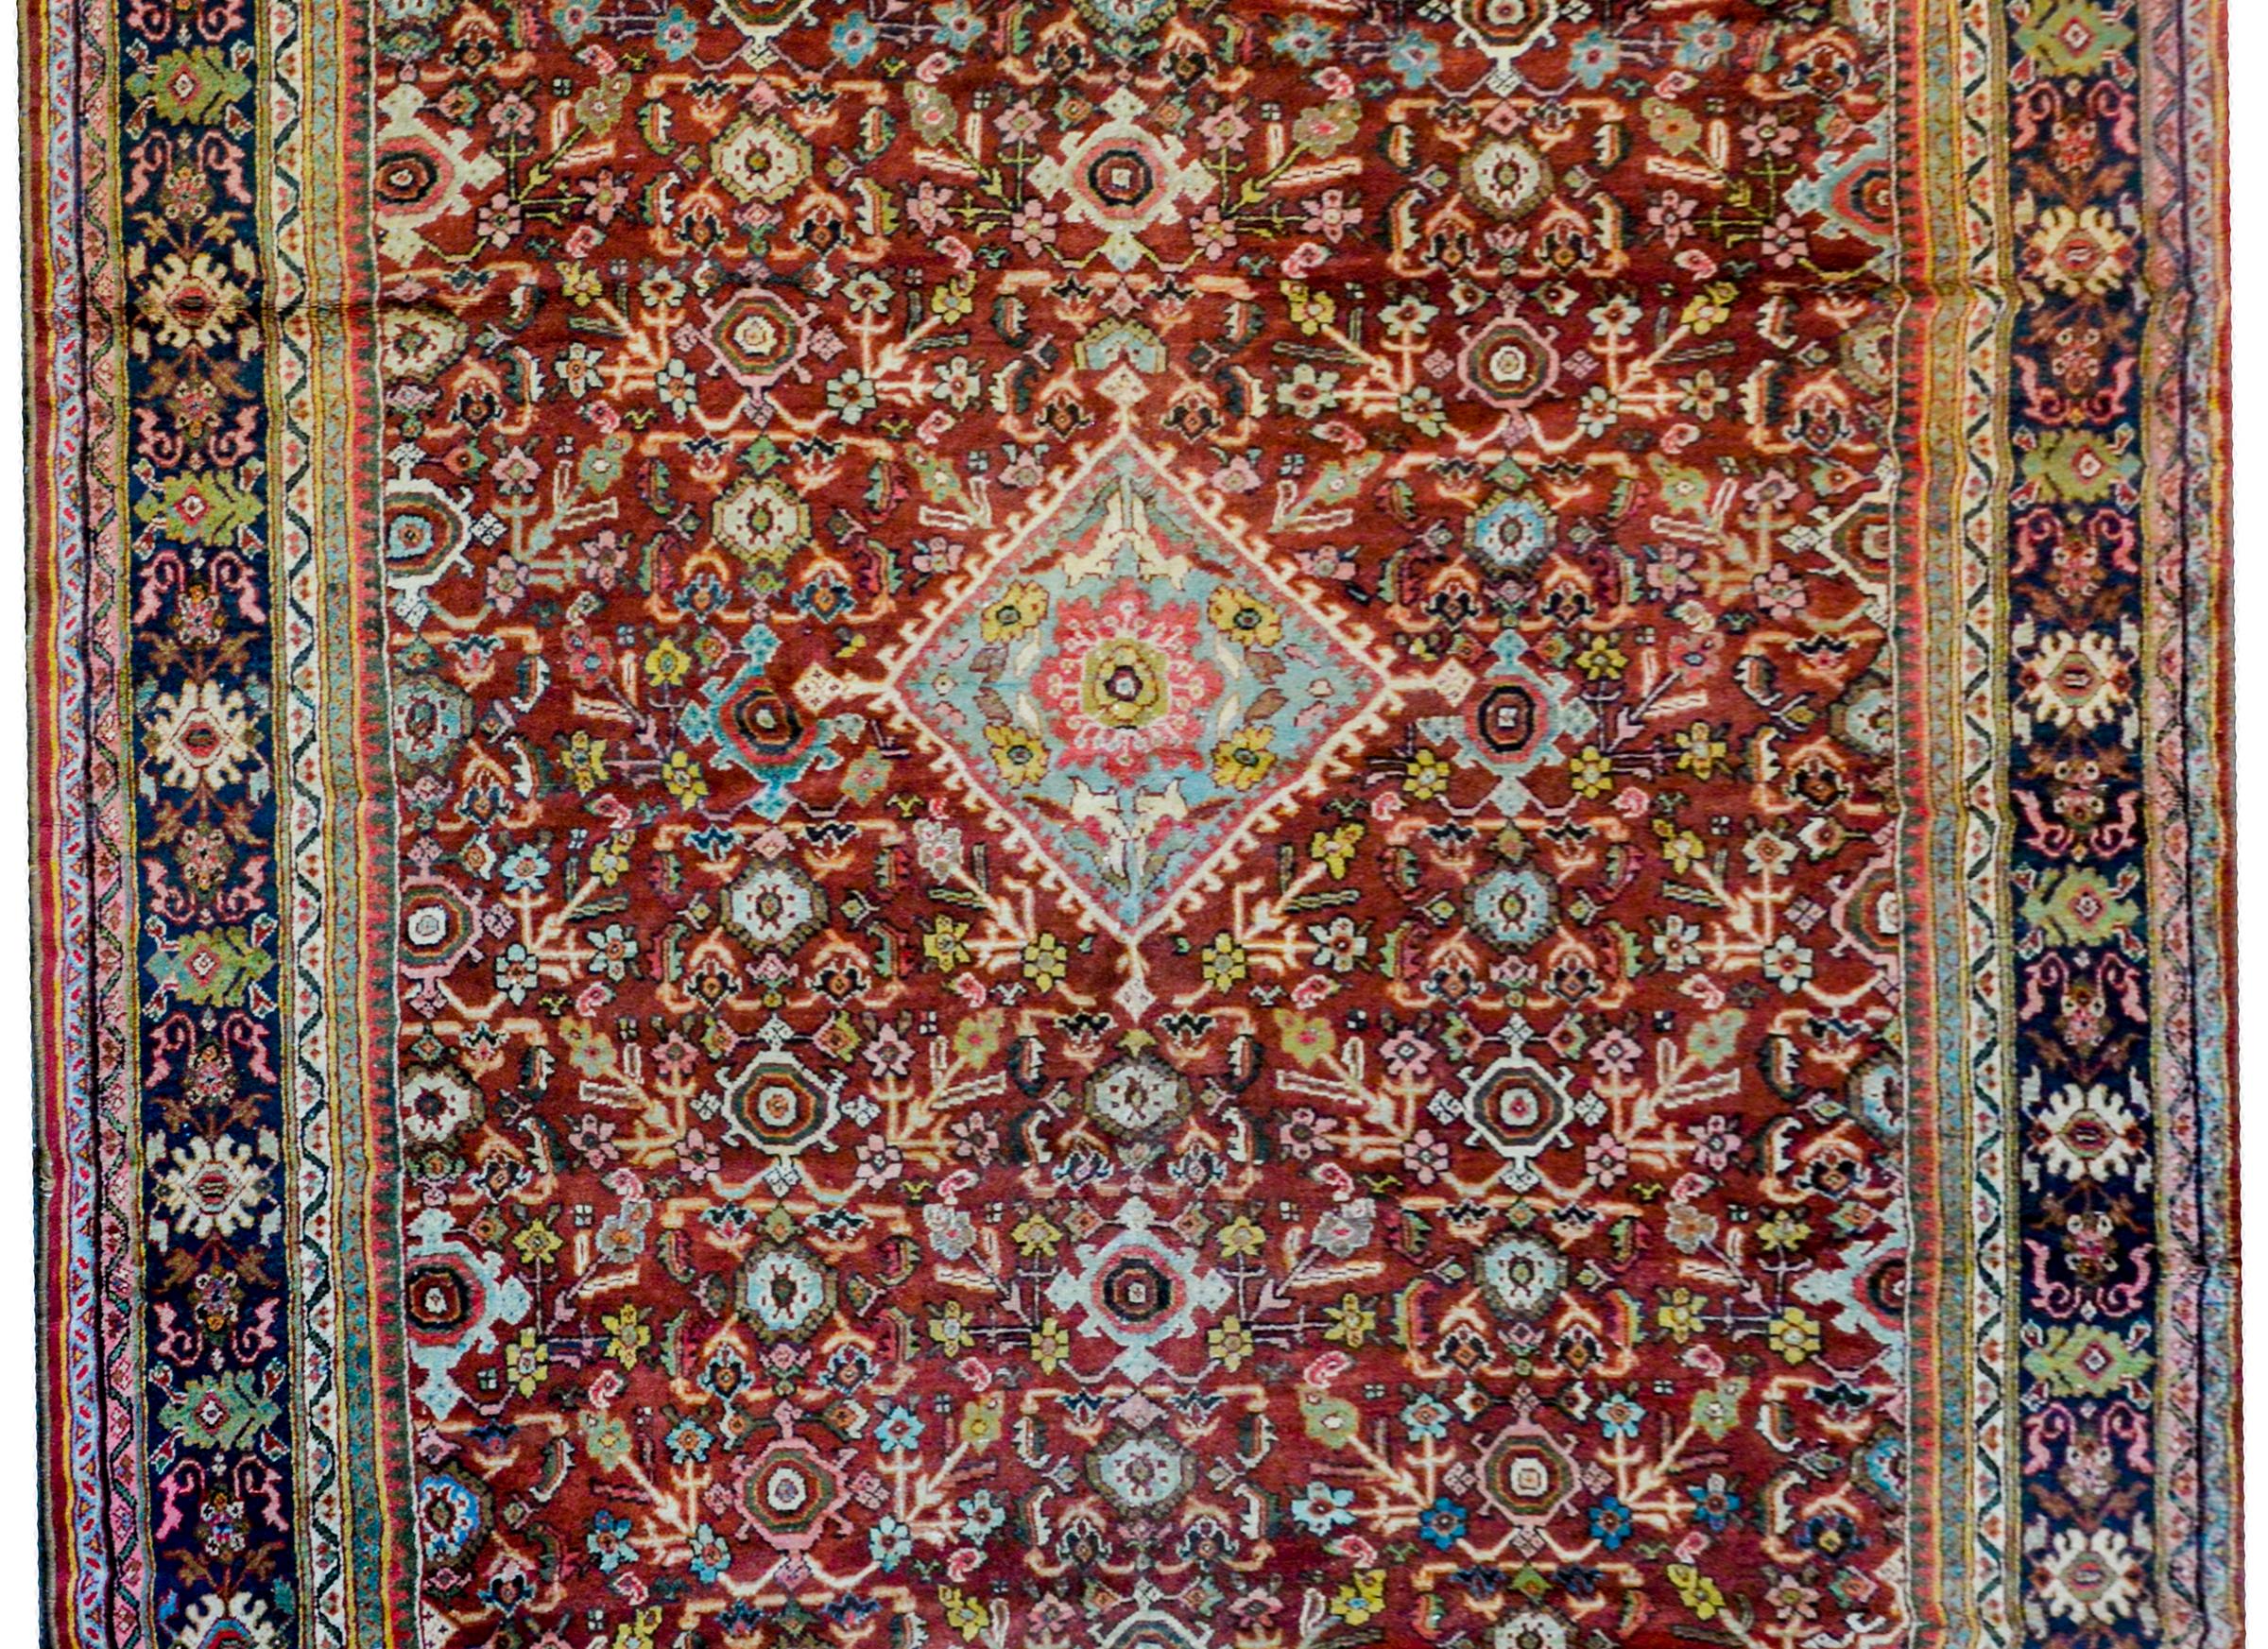 A fantastic early 20th century Mahal rug with an all-over lattice pattern of myriad flowers and leaves woven in white, light indigo, green, and gold vegetable dyed wool on a dark crimson colored background.  The border is wonderful with a wide